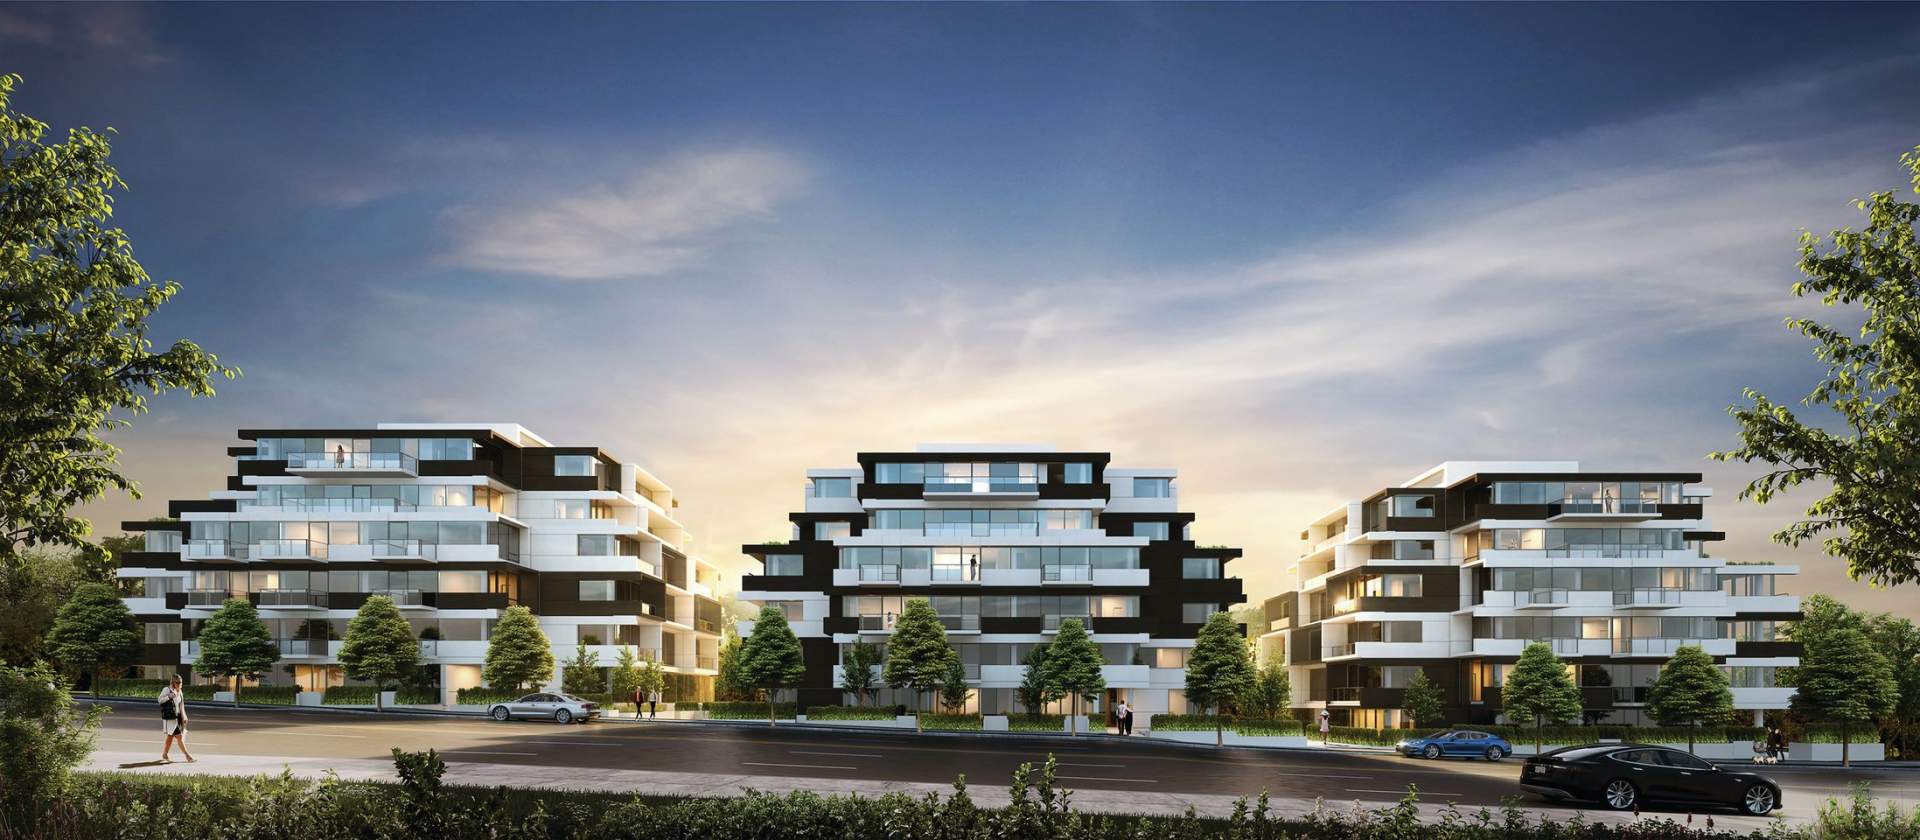 A collection of 130 modern condominiums presented in an industrial stack architecture.